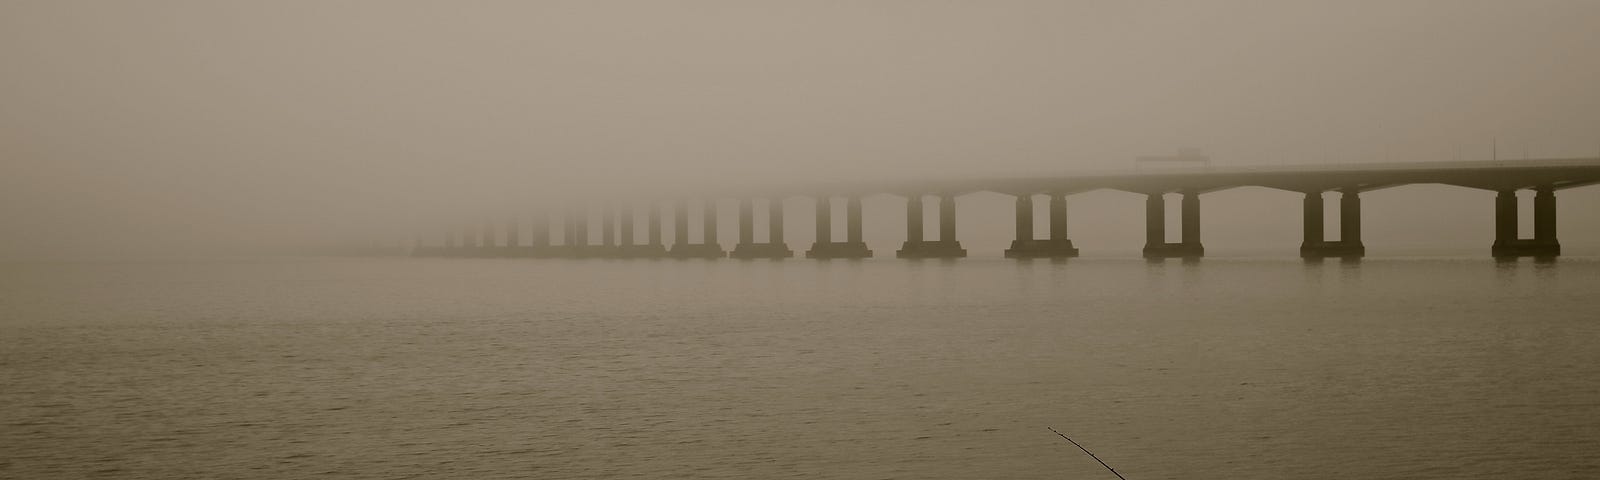 A sepia image of a long bridge over the Severn Estuary. The bridge disappears into fog. In the foreground is a fisherman. The picture represents the unknowable future of mankind and the Earth.